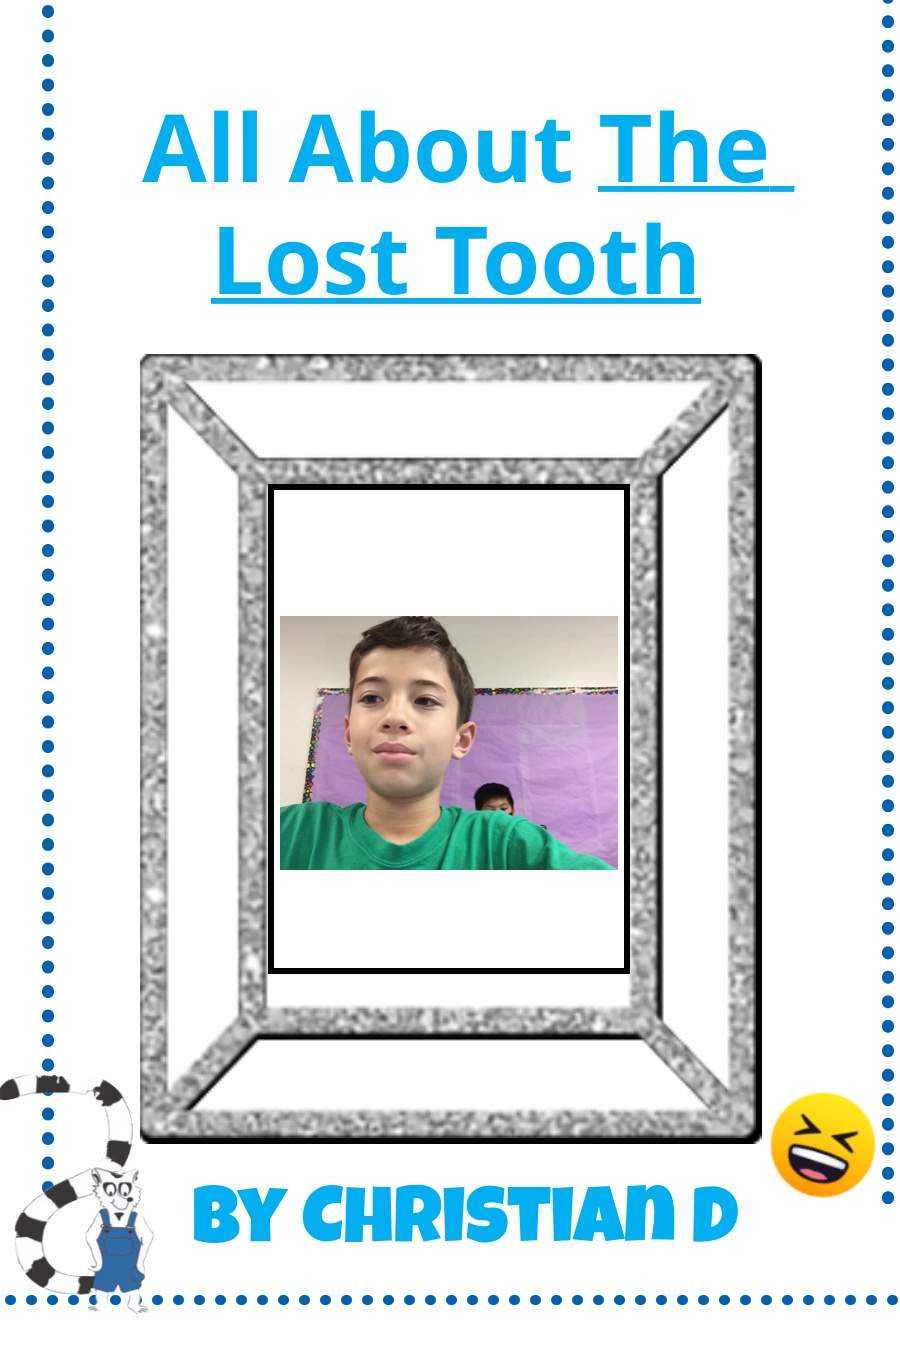 All About The Lost Tooth by Christian D